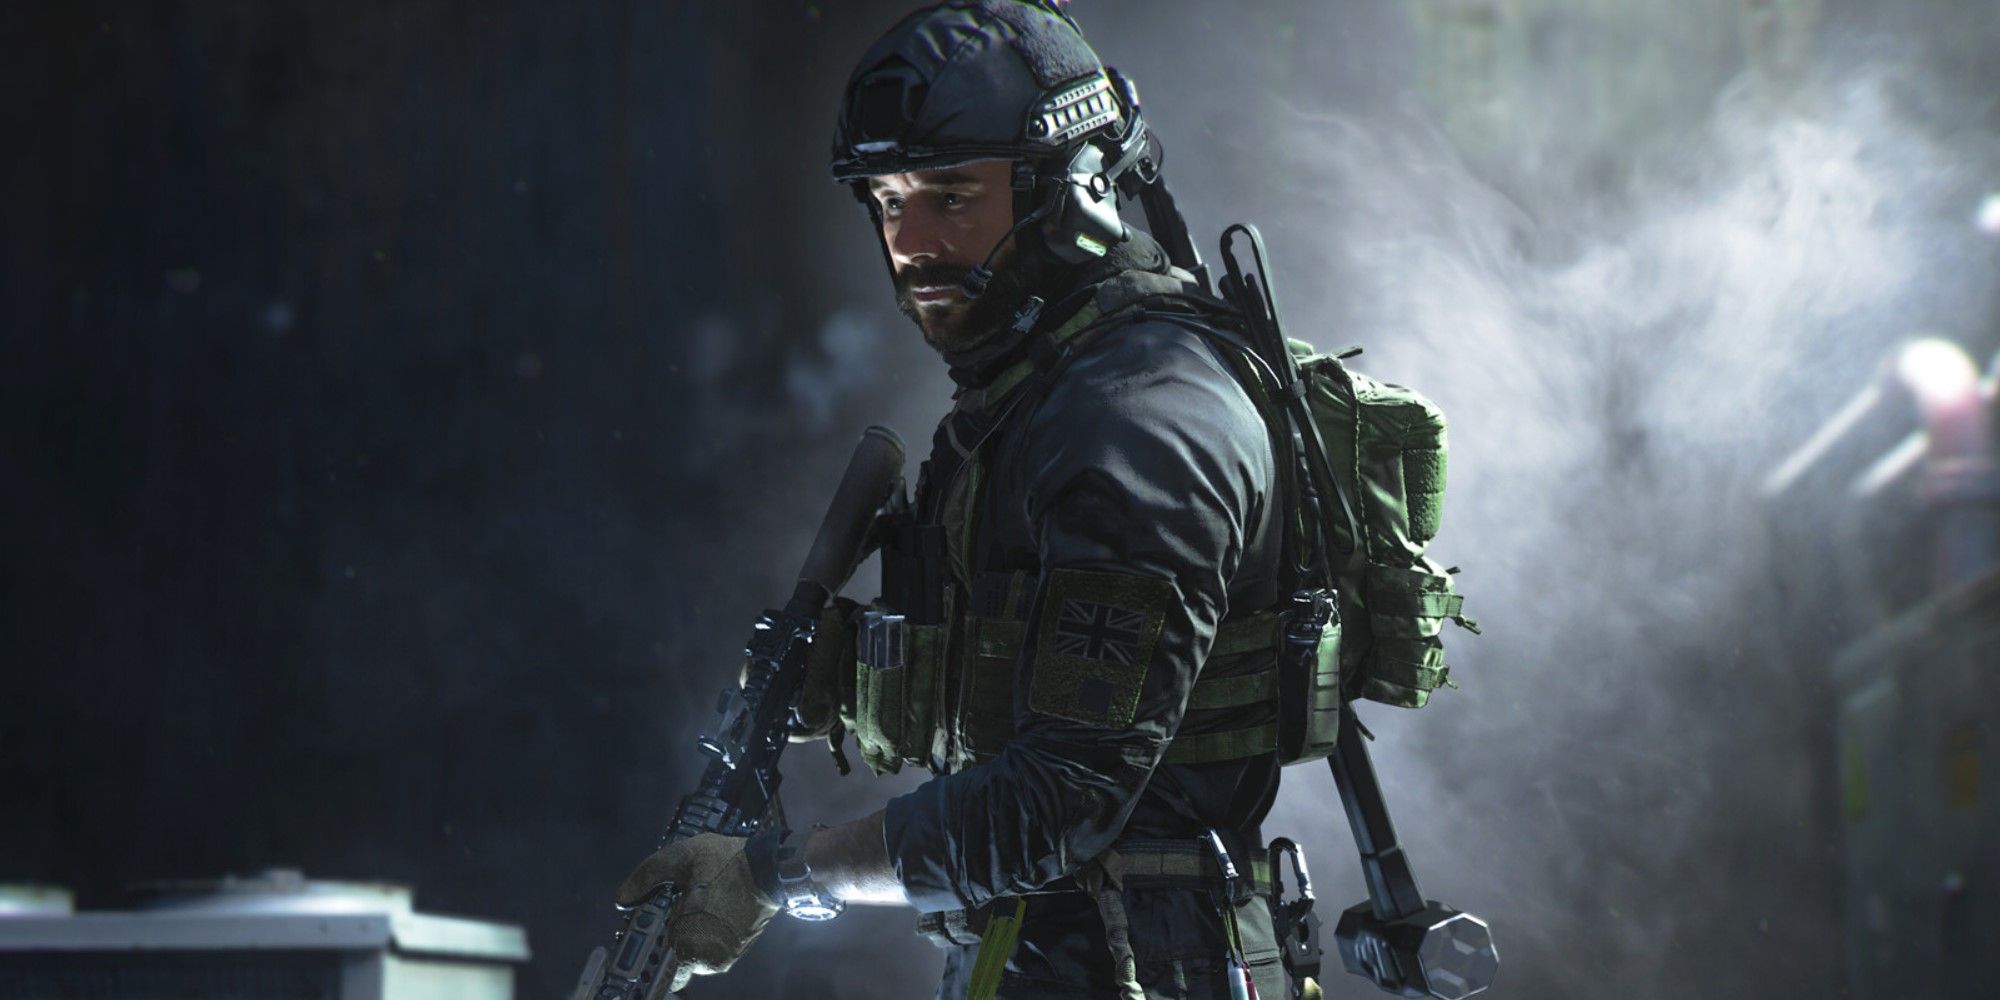 Call of Duty: Modern Warfare 2' review: A return to form for the